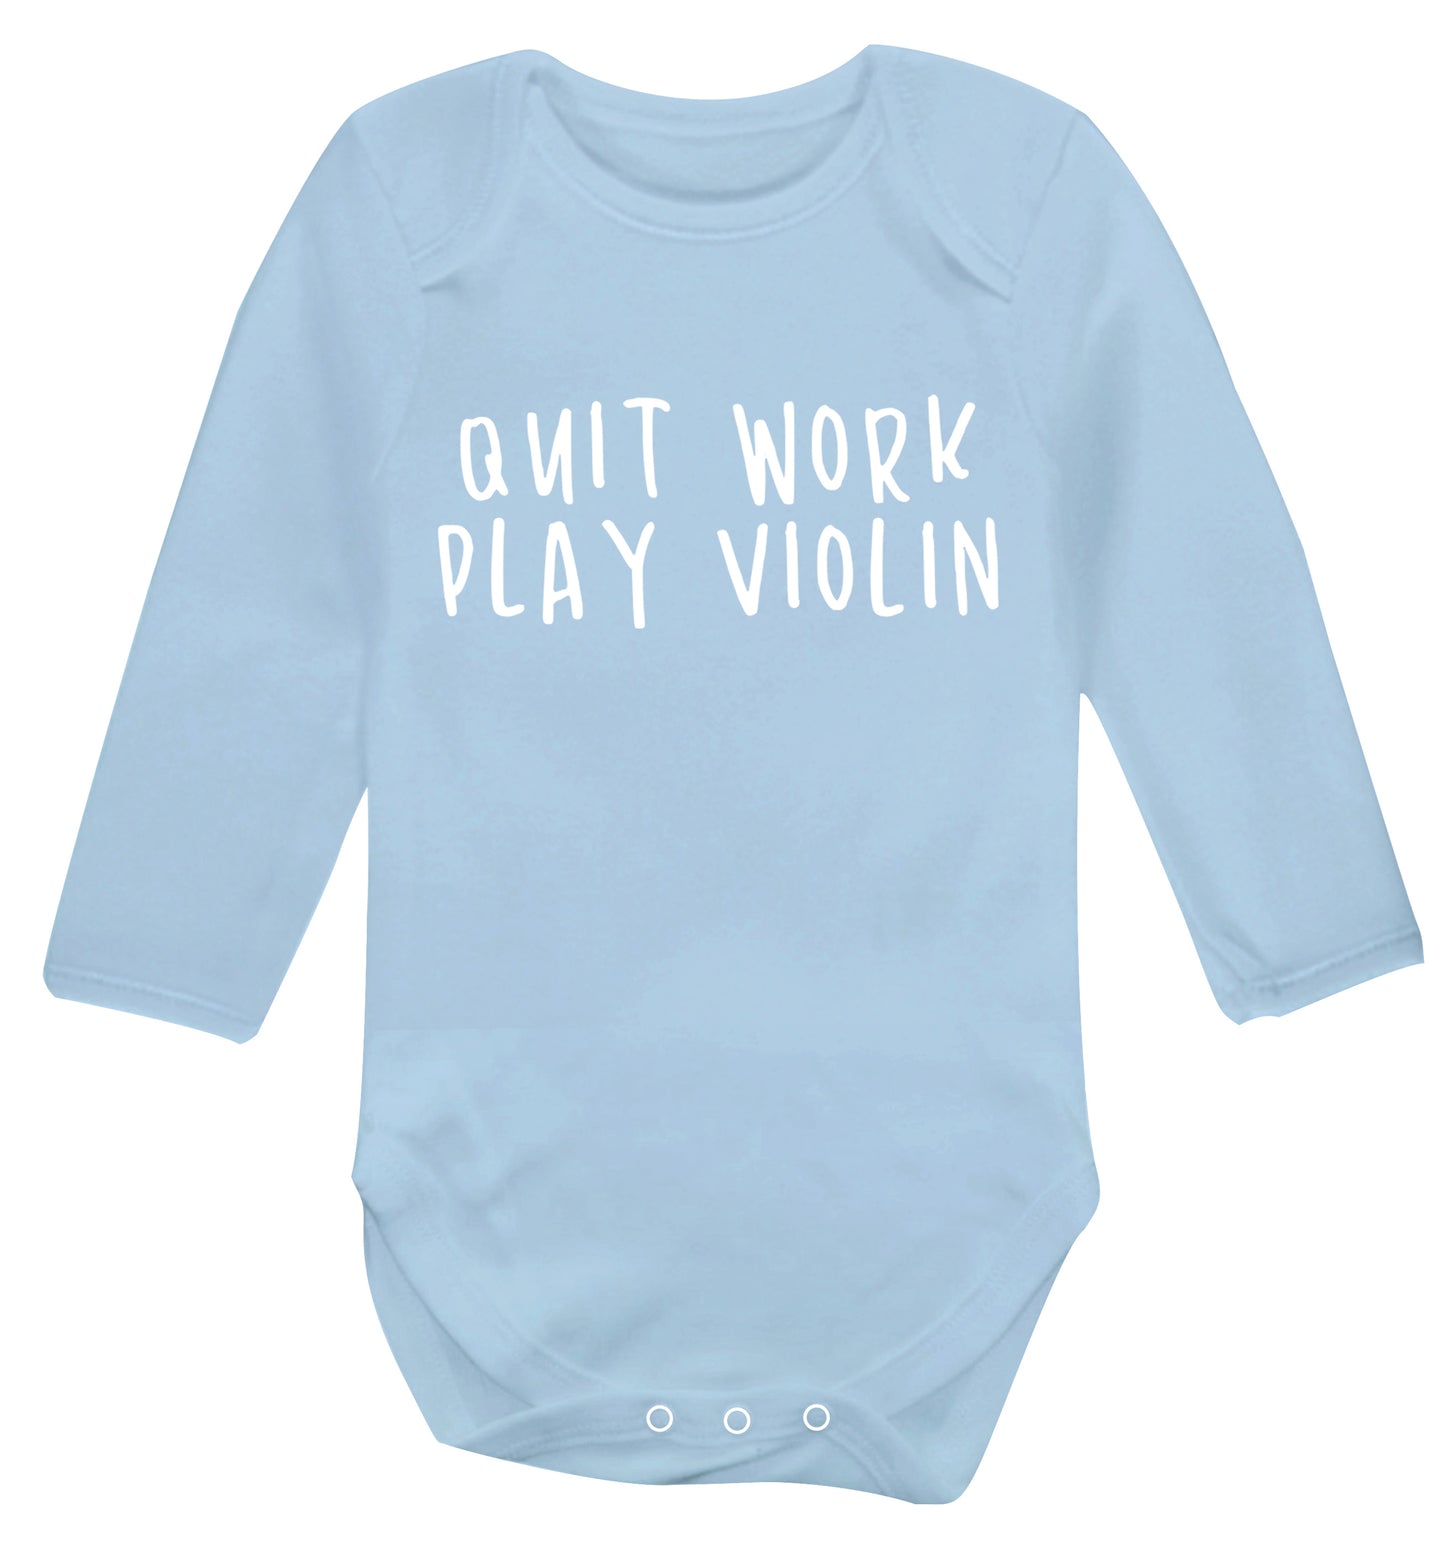 Quit work play violin Baby Vest long sleeved pale blue 6-12 months